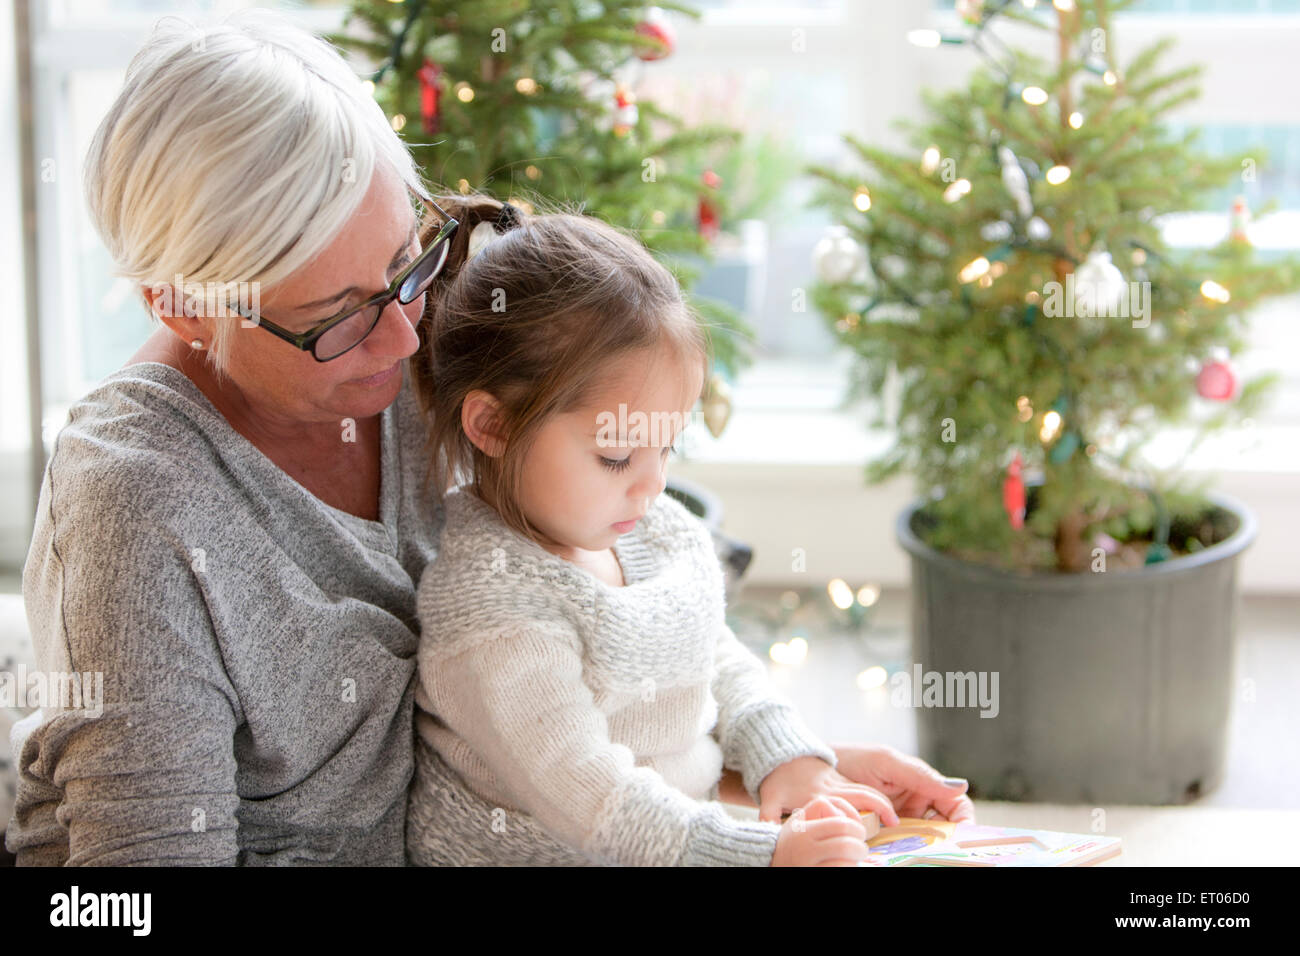 Grandmother watching granddaughter drawing in front of Christmas trees Stock Photo